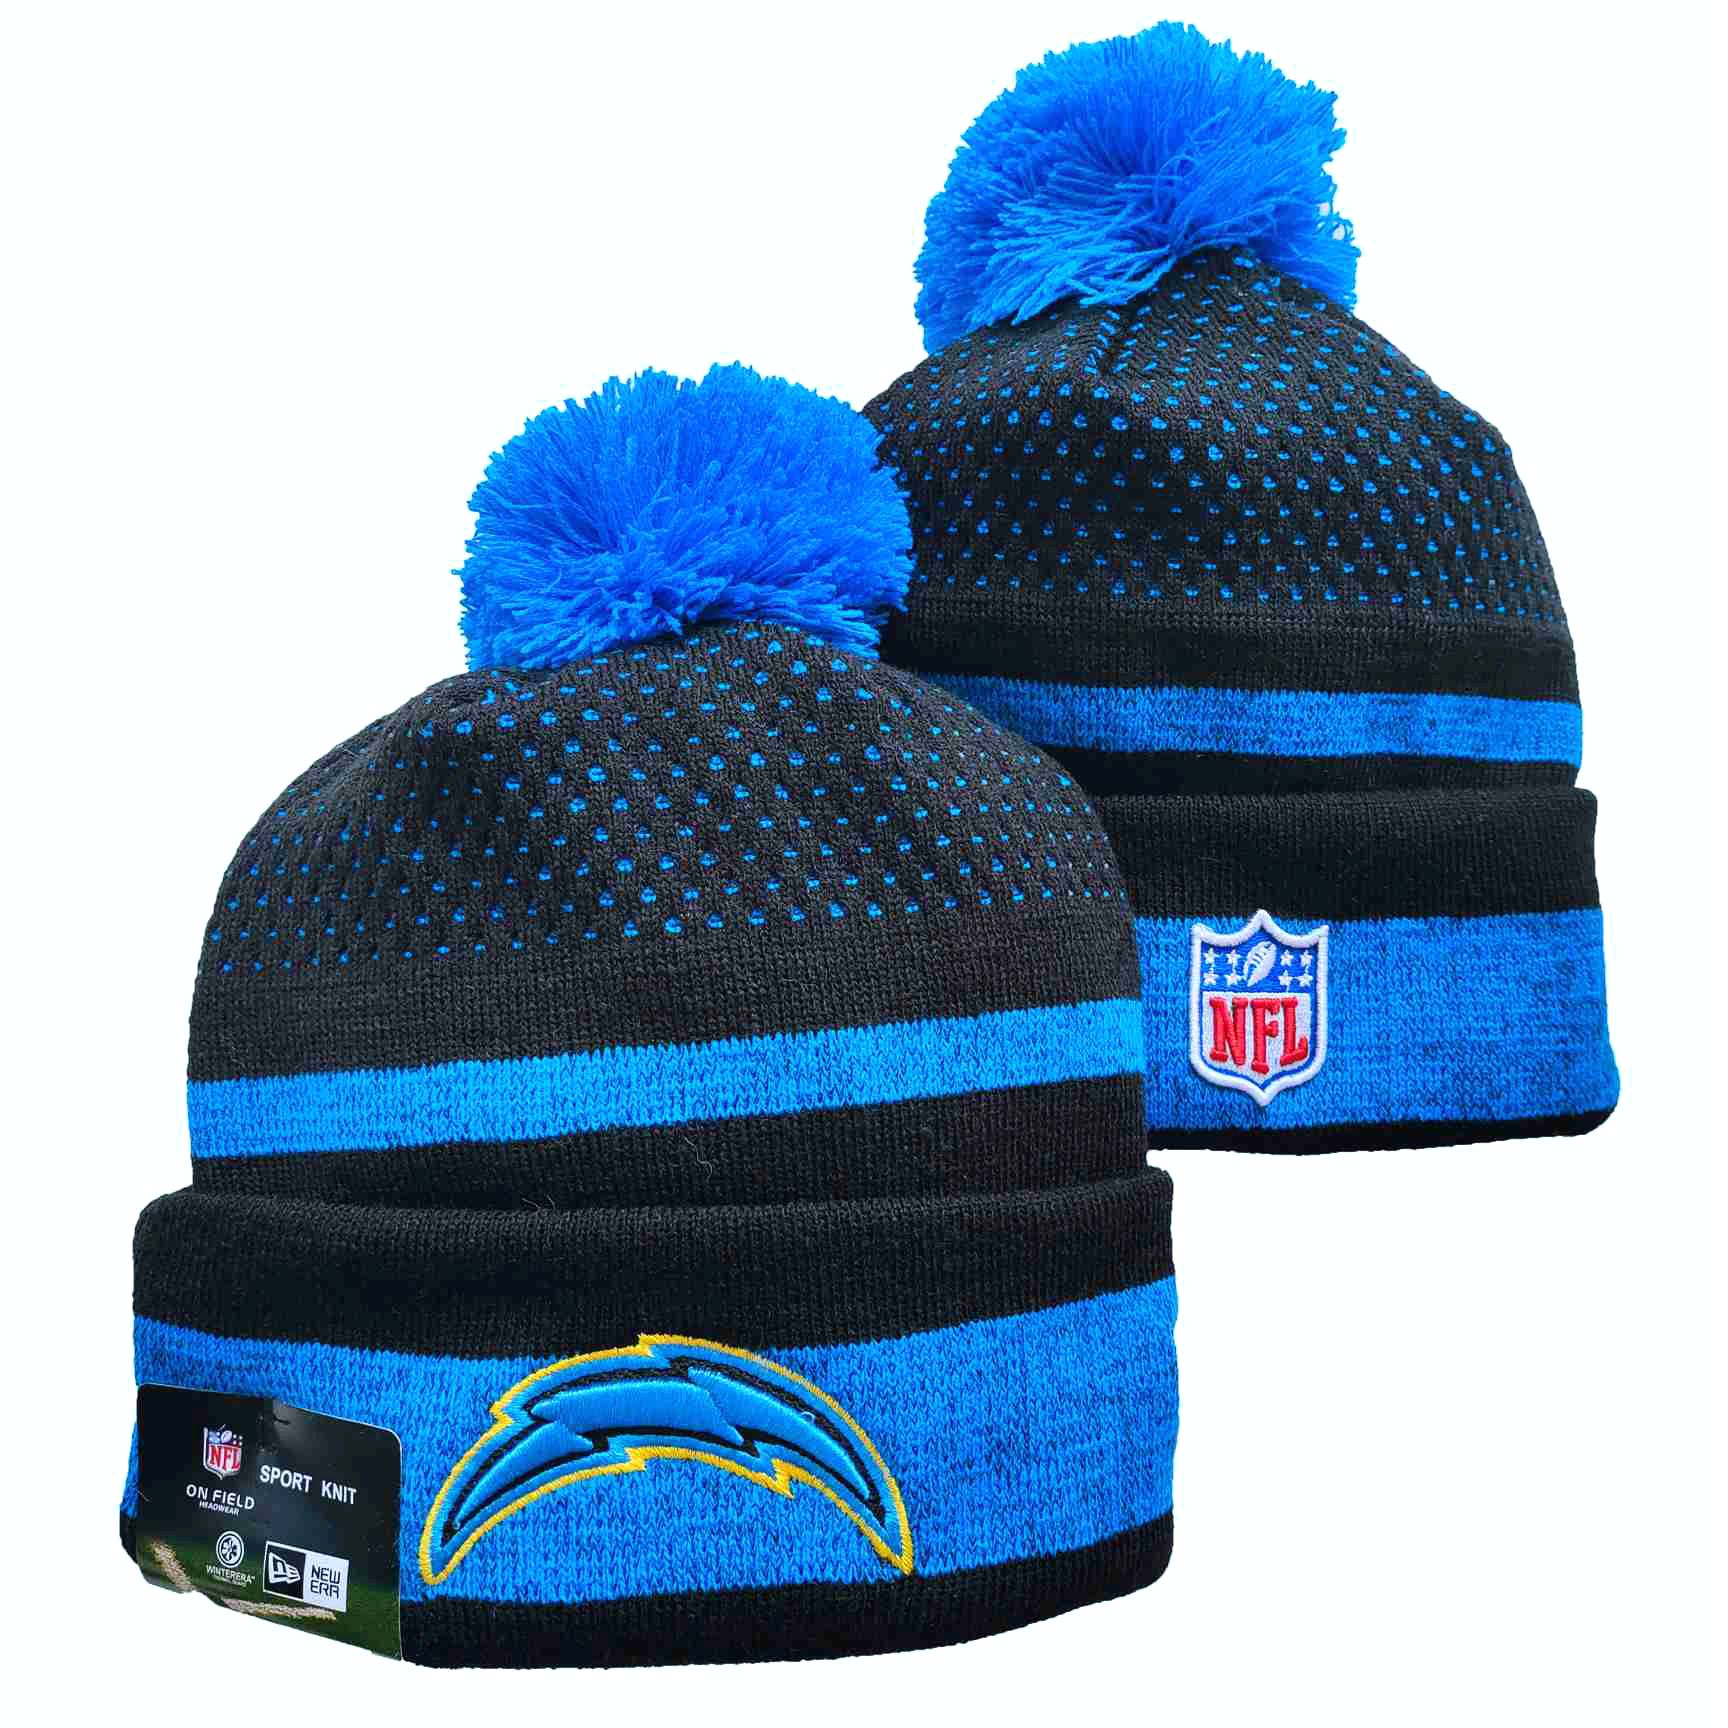 NFL San Diego Chargers Beanies Knit Hats-YD1112